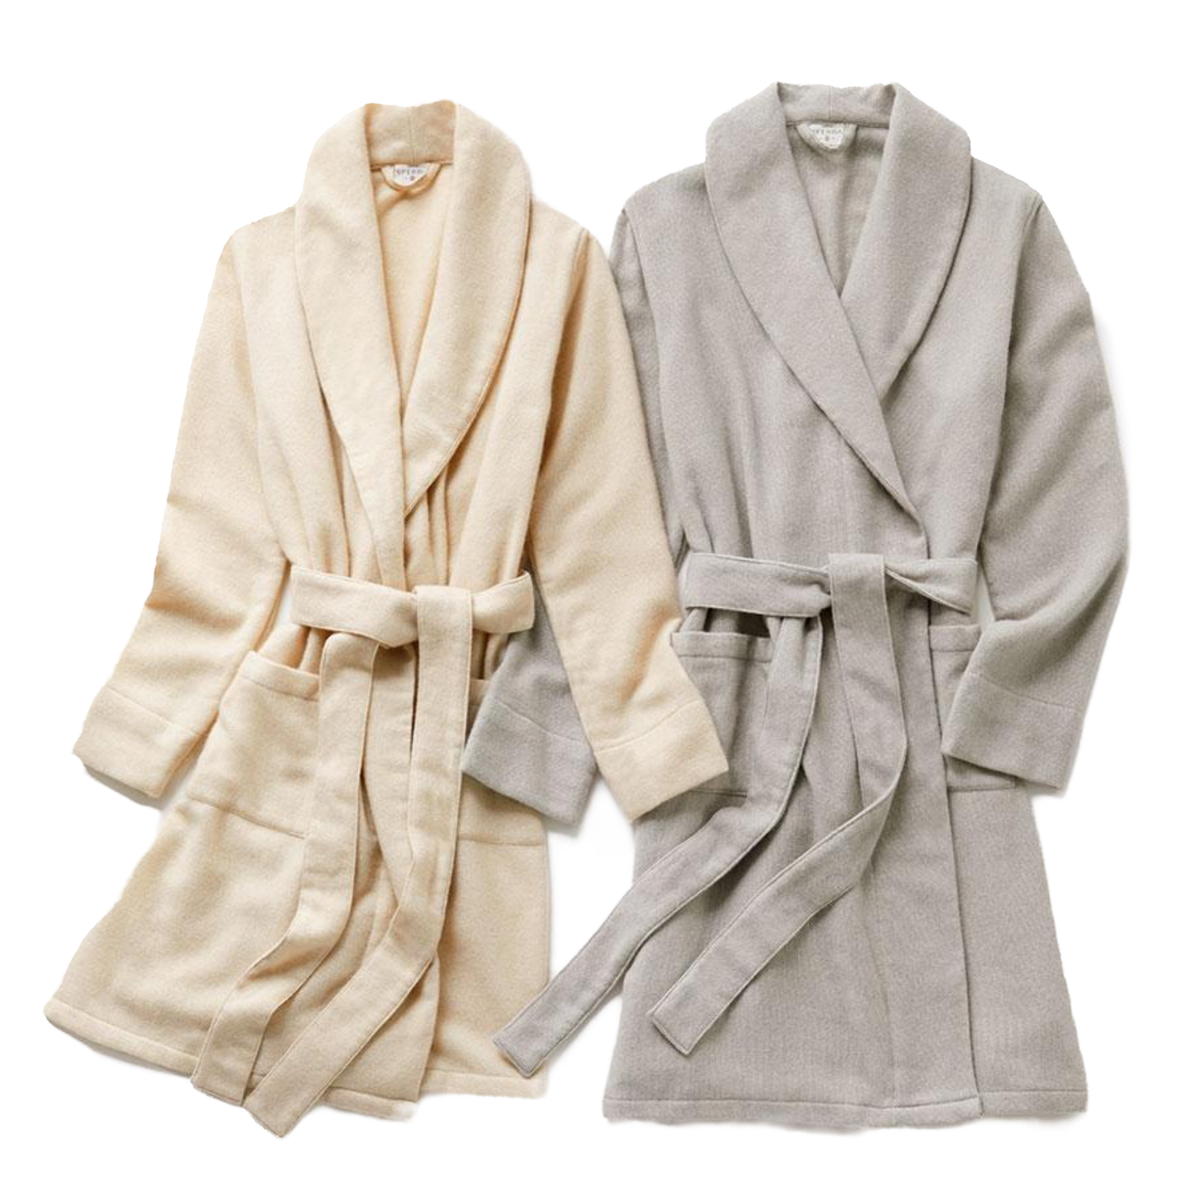 Front View of Sferra Sardinia’s Cashmere Robes Both Colors